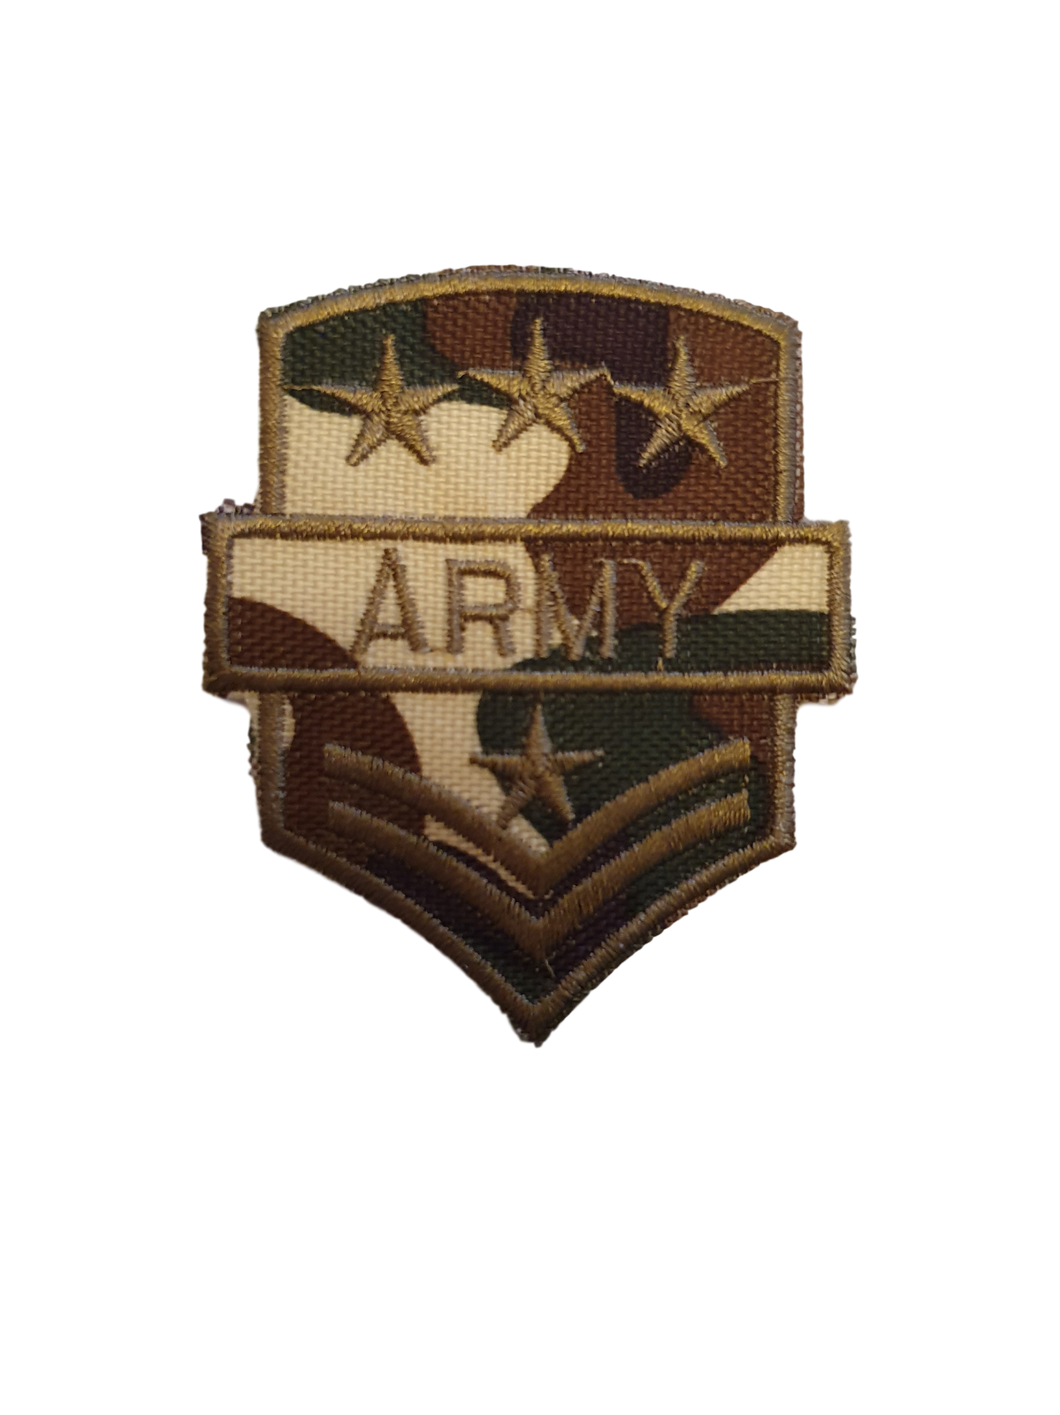 ARMY 3 STAR CAMOUFLAGE IRON ON CLOTH EMBROIDERY PATCH CLOTHES BAGS 7cm x 5.5cm